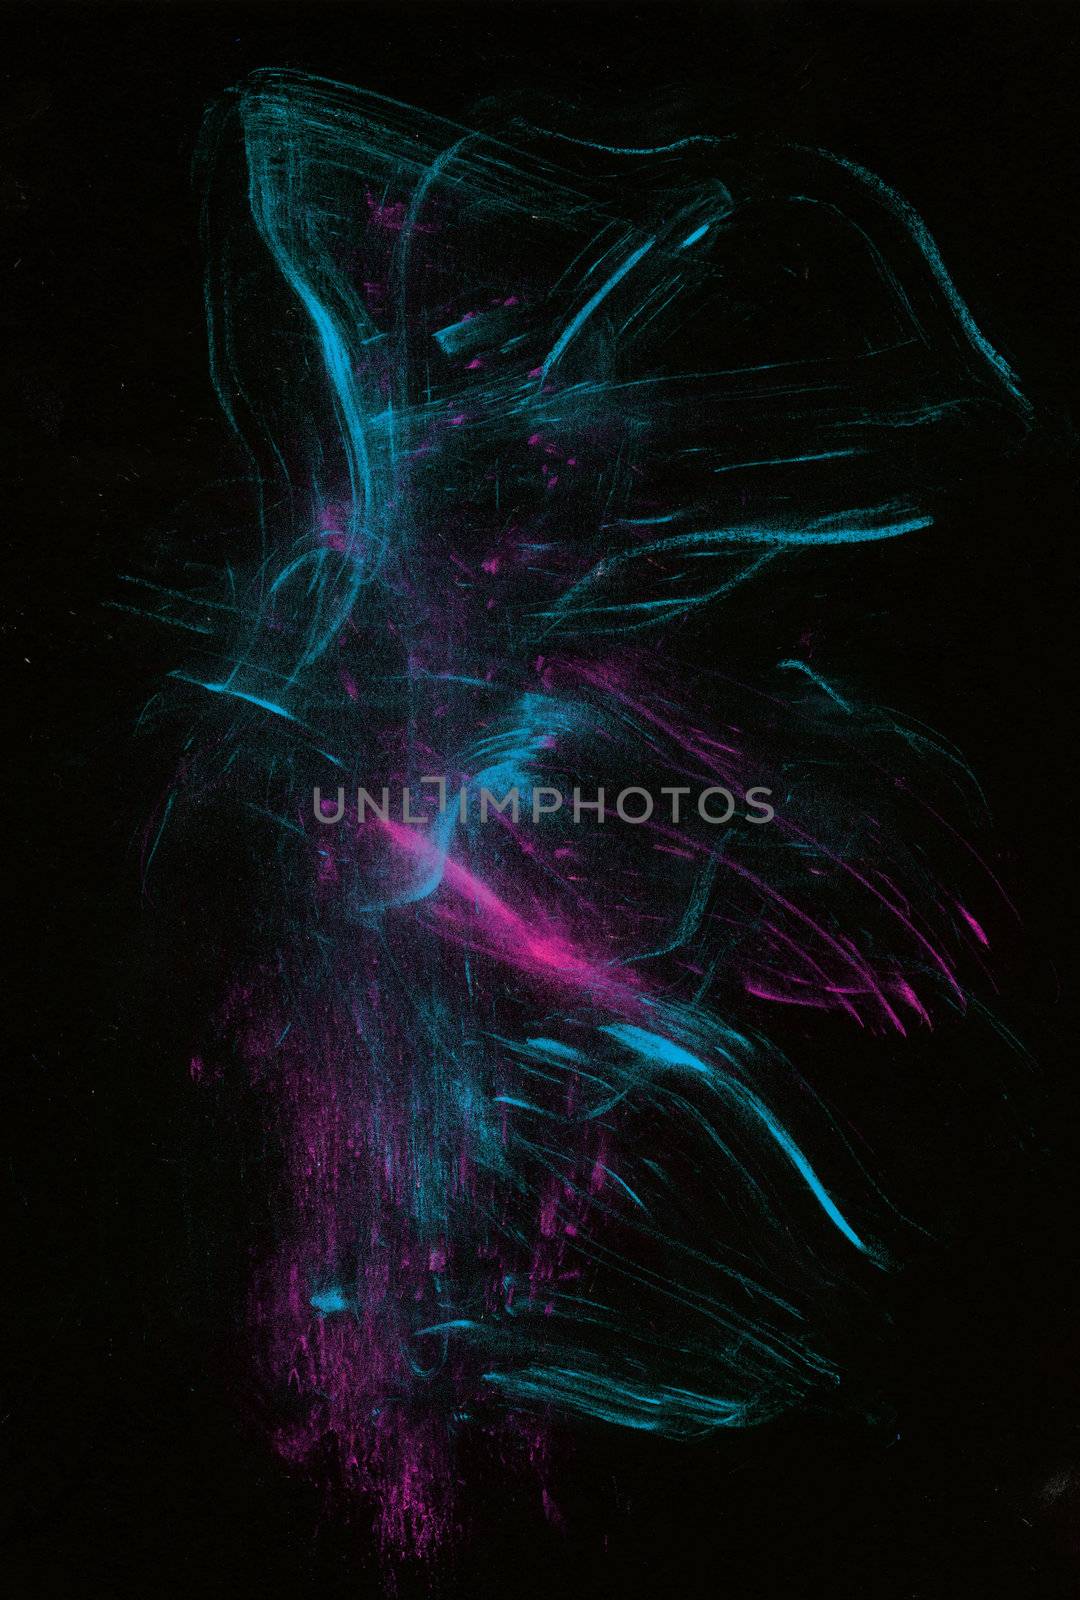 Abstract Shapes and elements on black backgrounds